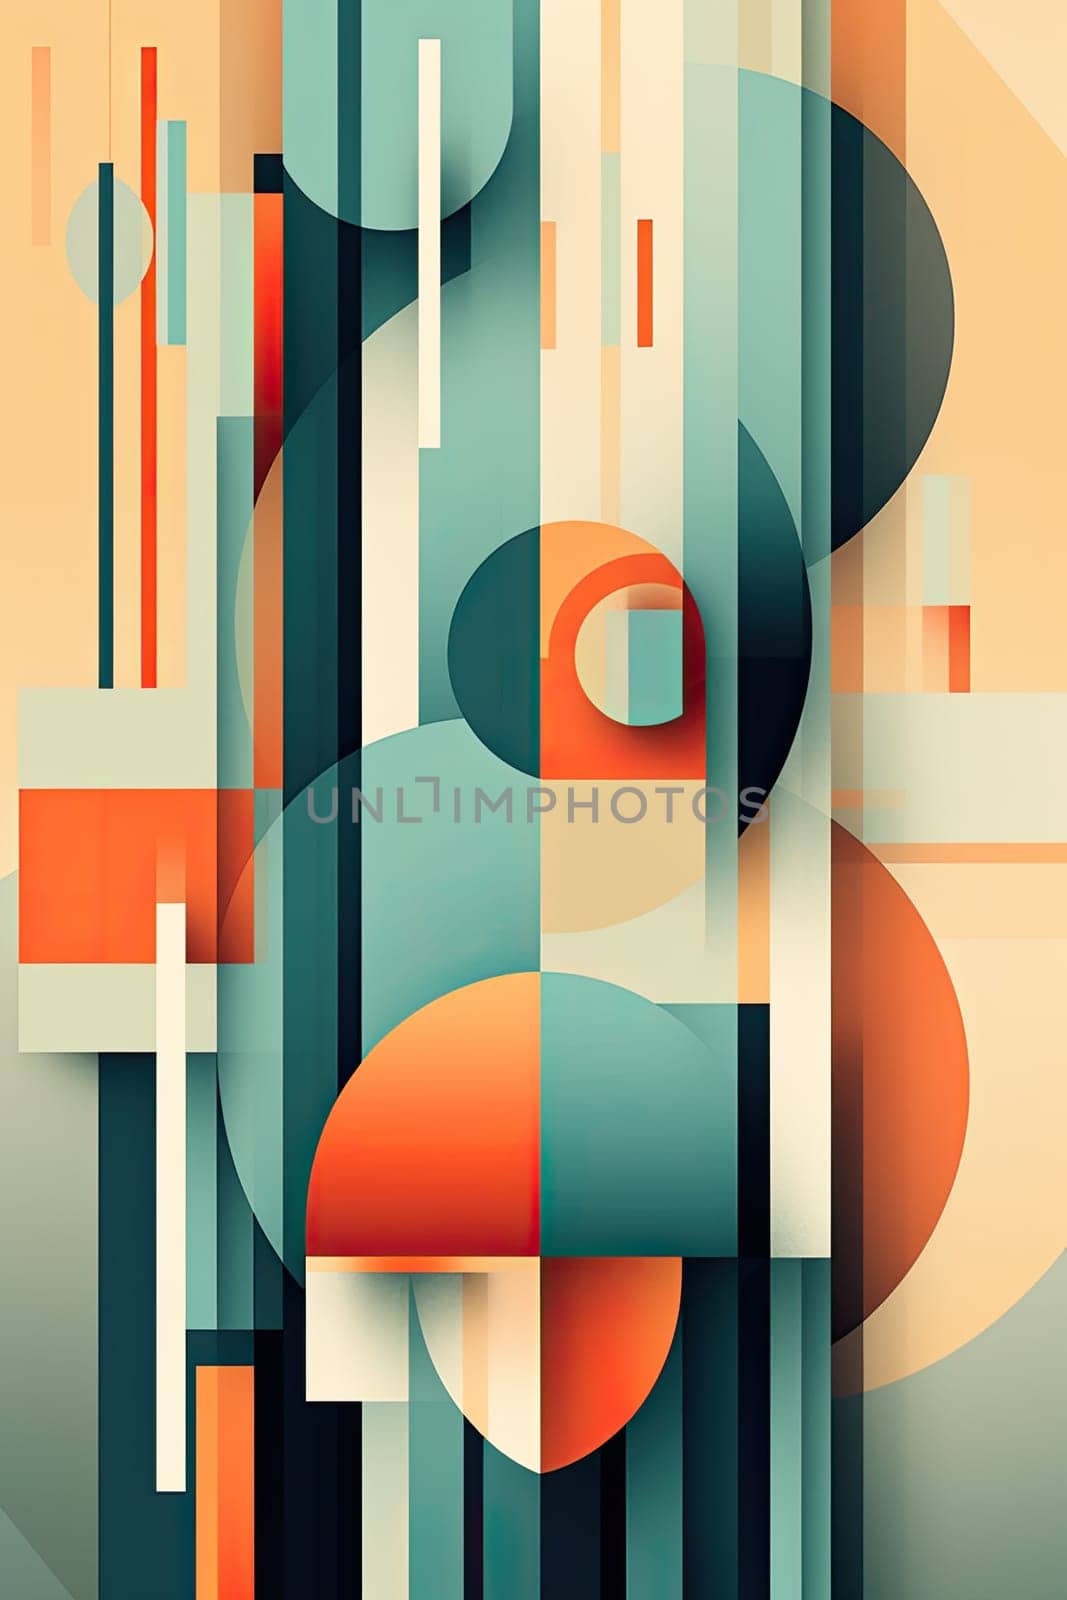 A captivating abstract composition with bold and vibrant shapes merging together.